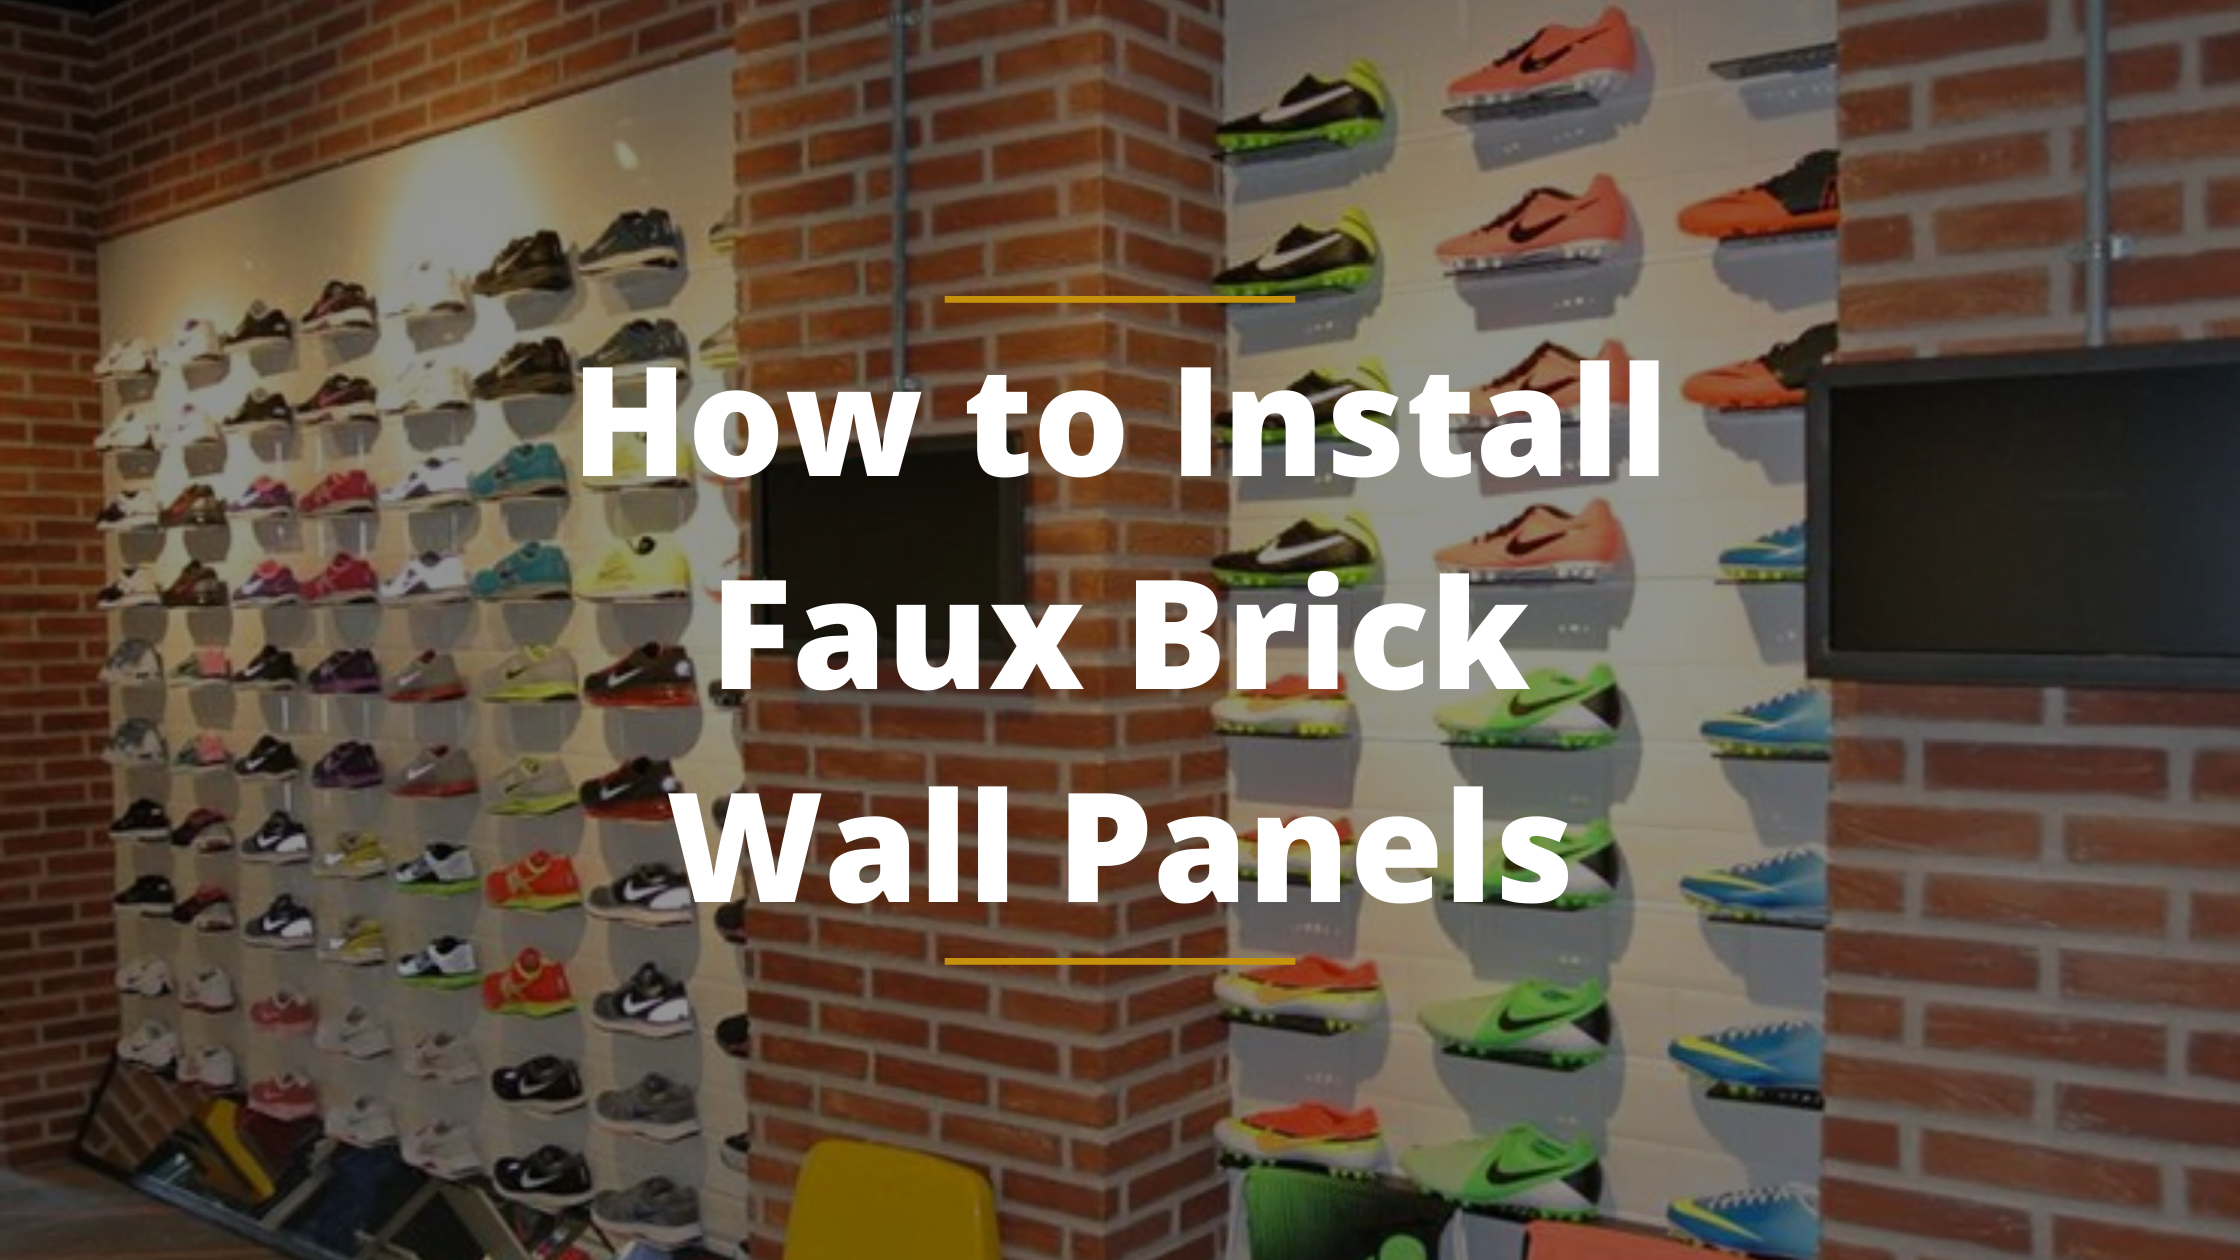 How to Install Faux Brick Wall Panels